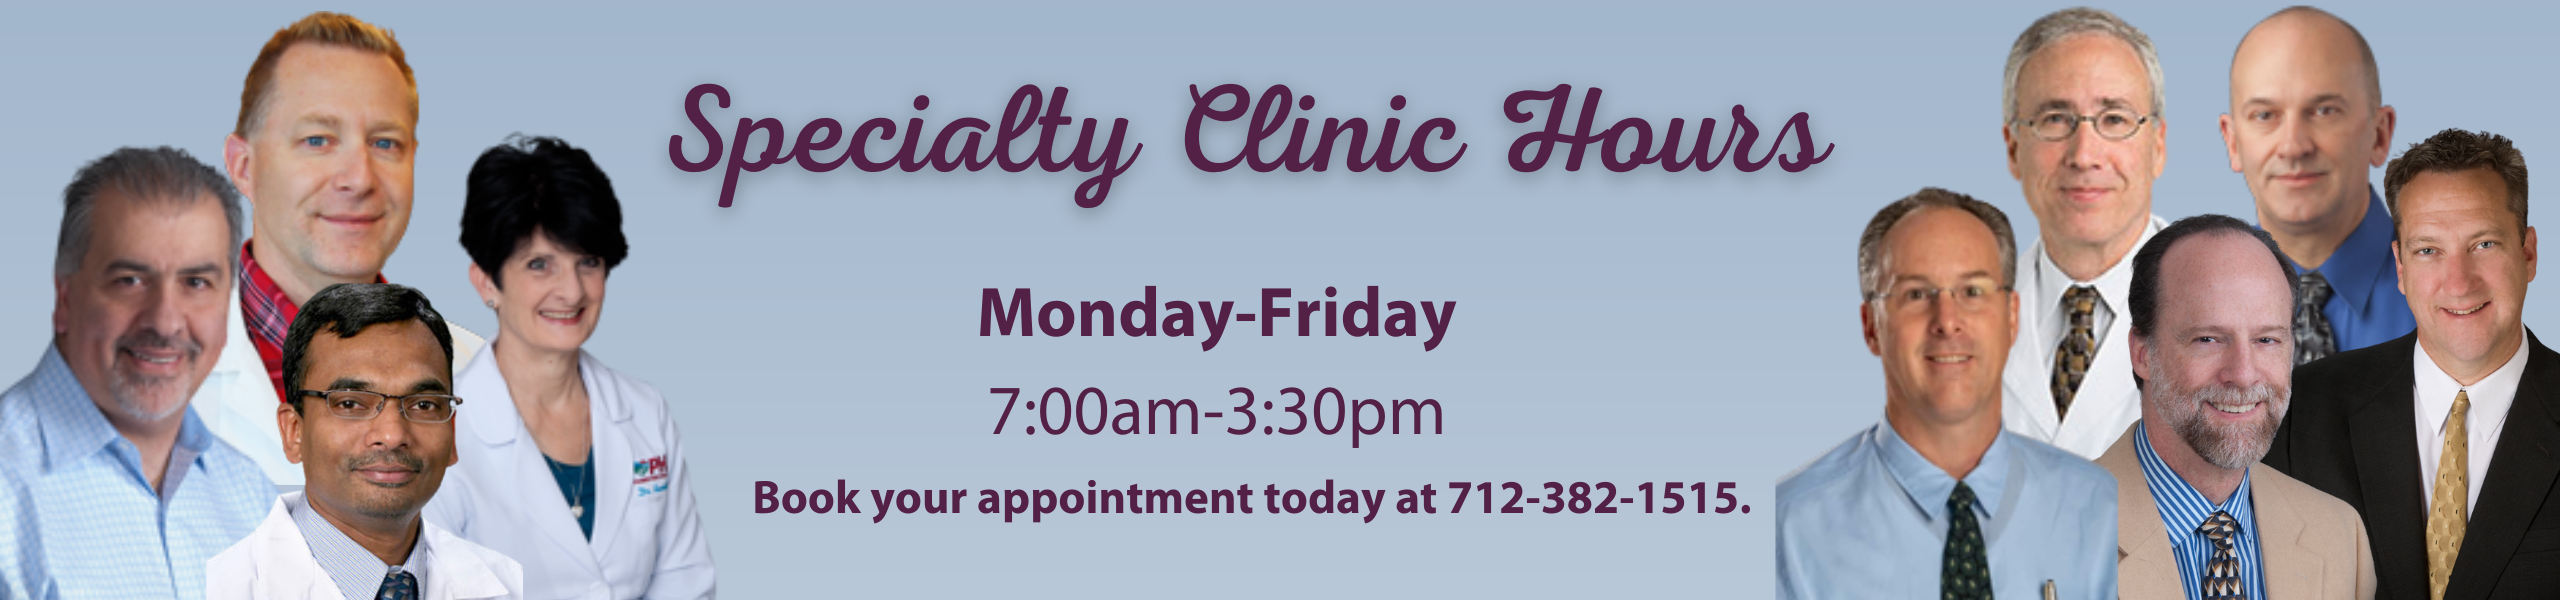 Specialty Clinic Hours
Monday-Friday
7:00am-3:30pm
Book your appointment today at 712-382-1515.